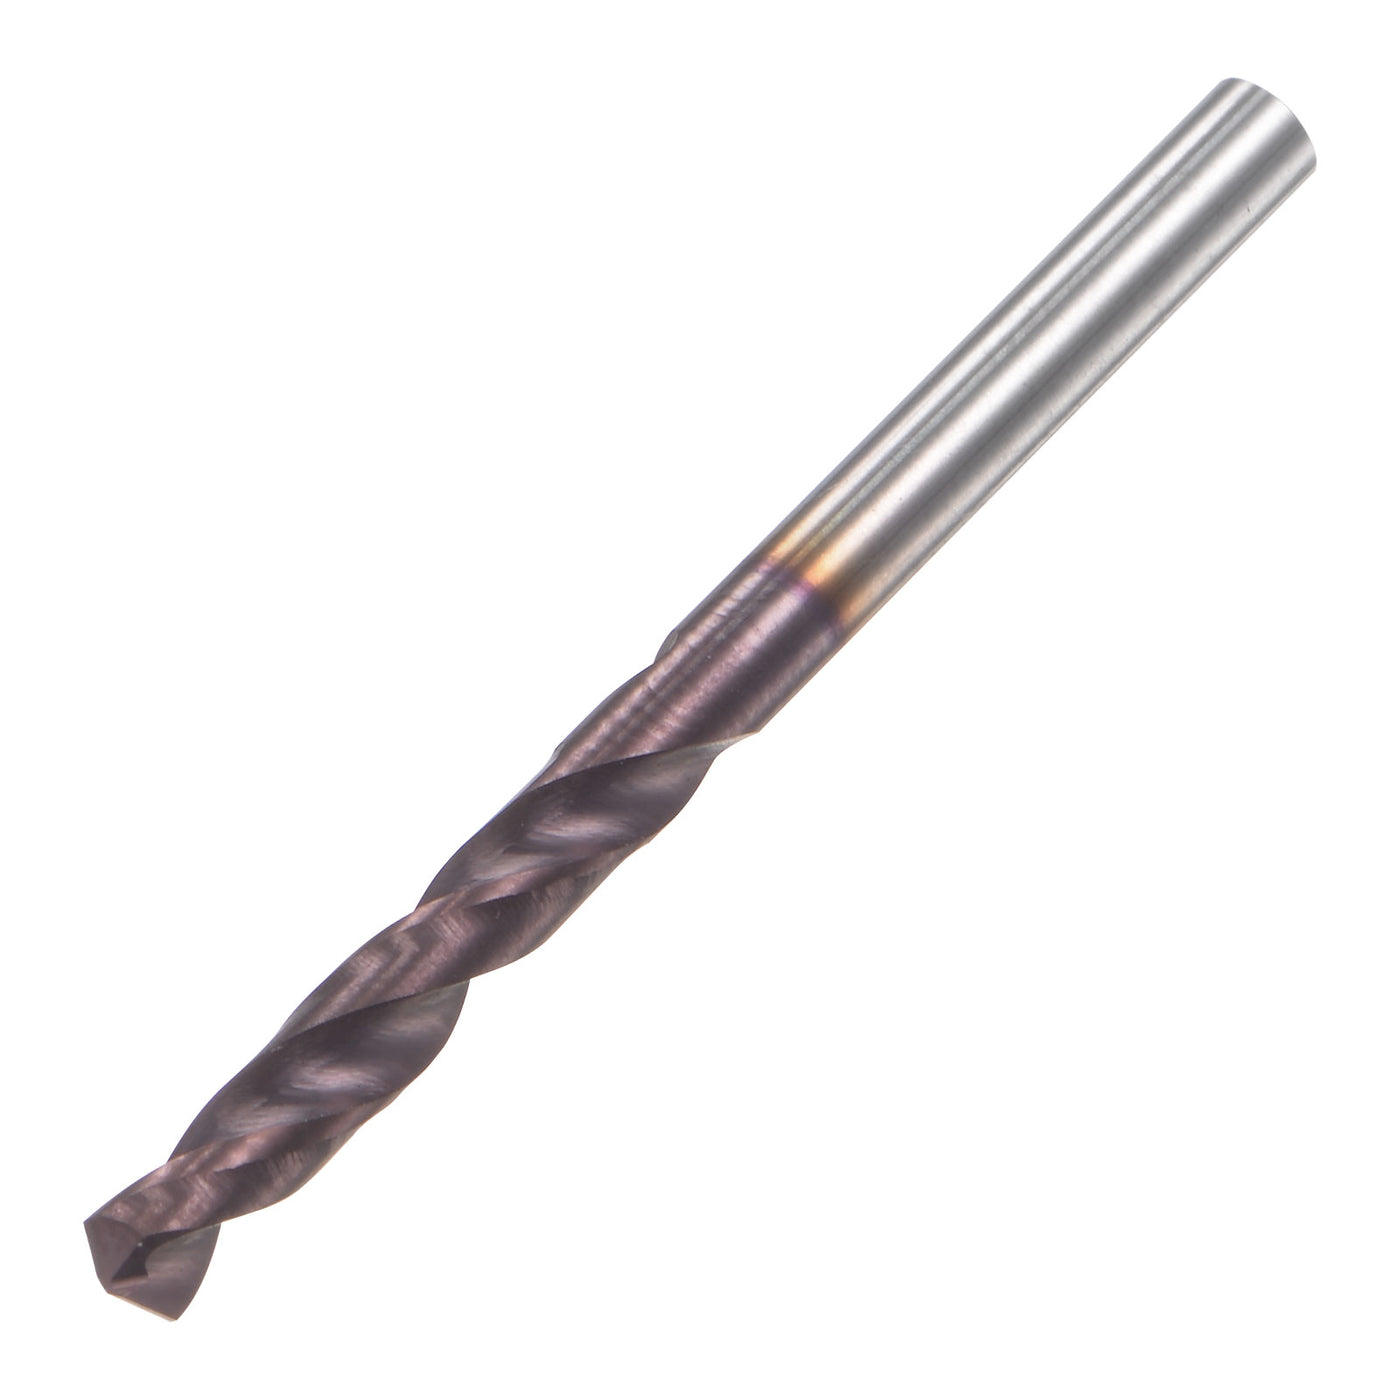 uxcell Uxcell 2.9mm DIN K45 Tungsten Carbide AlTiSin Coated Drill Bit for Stainless Steel